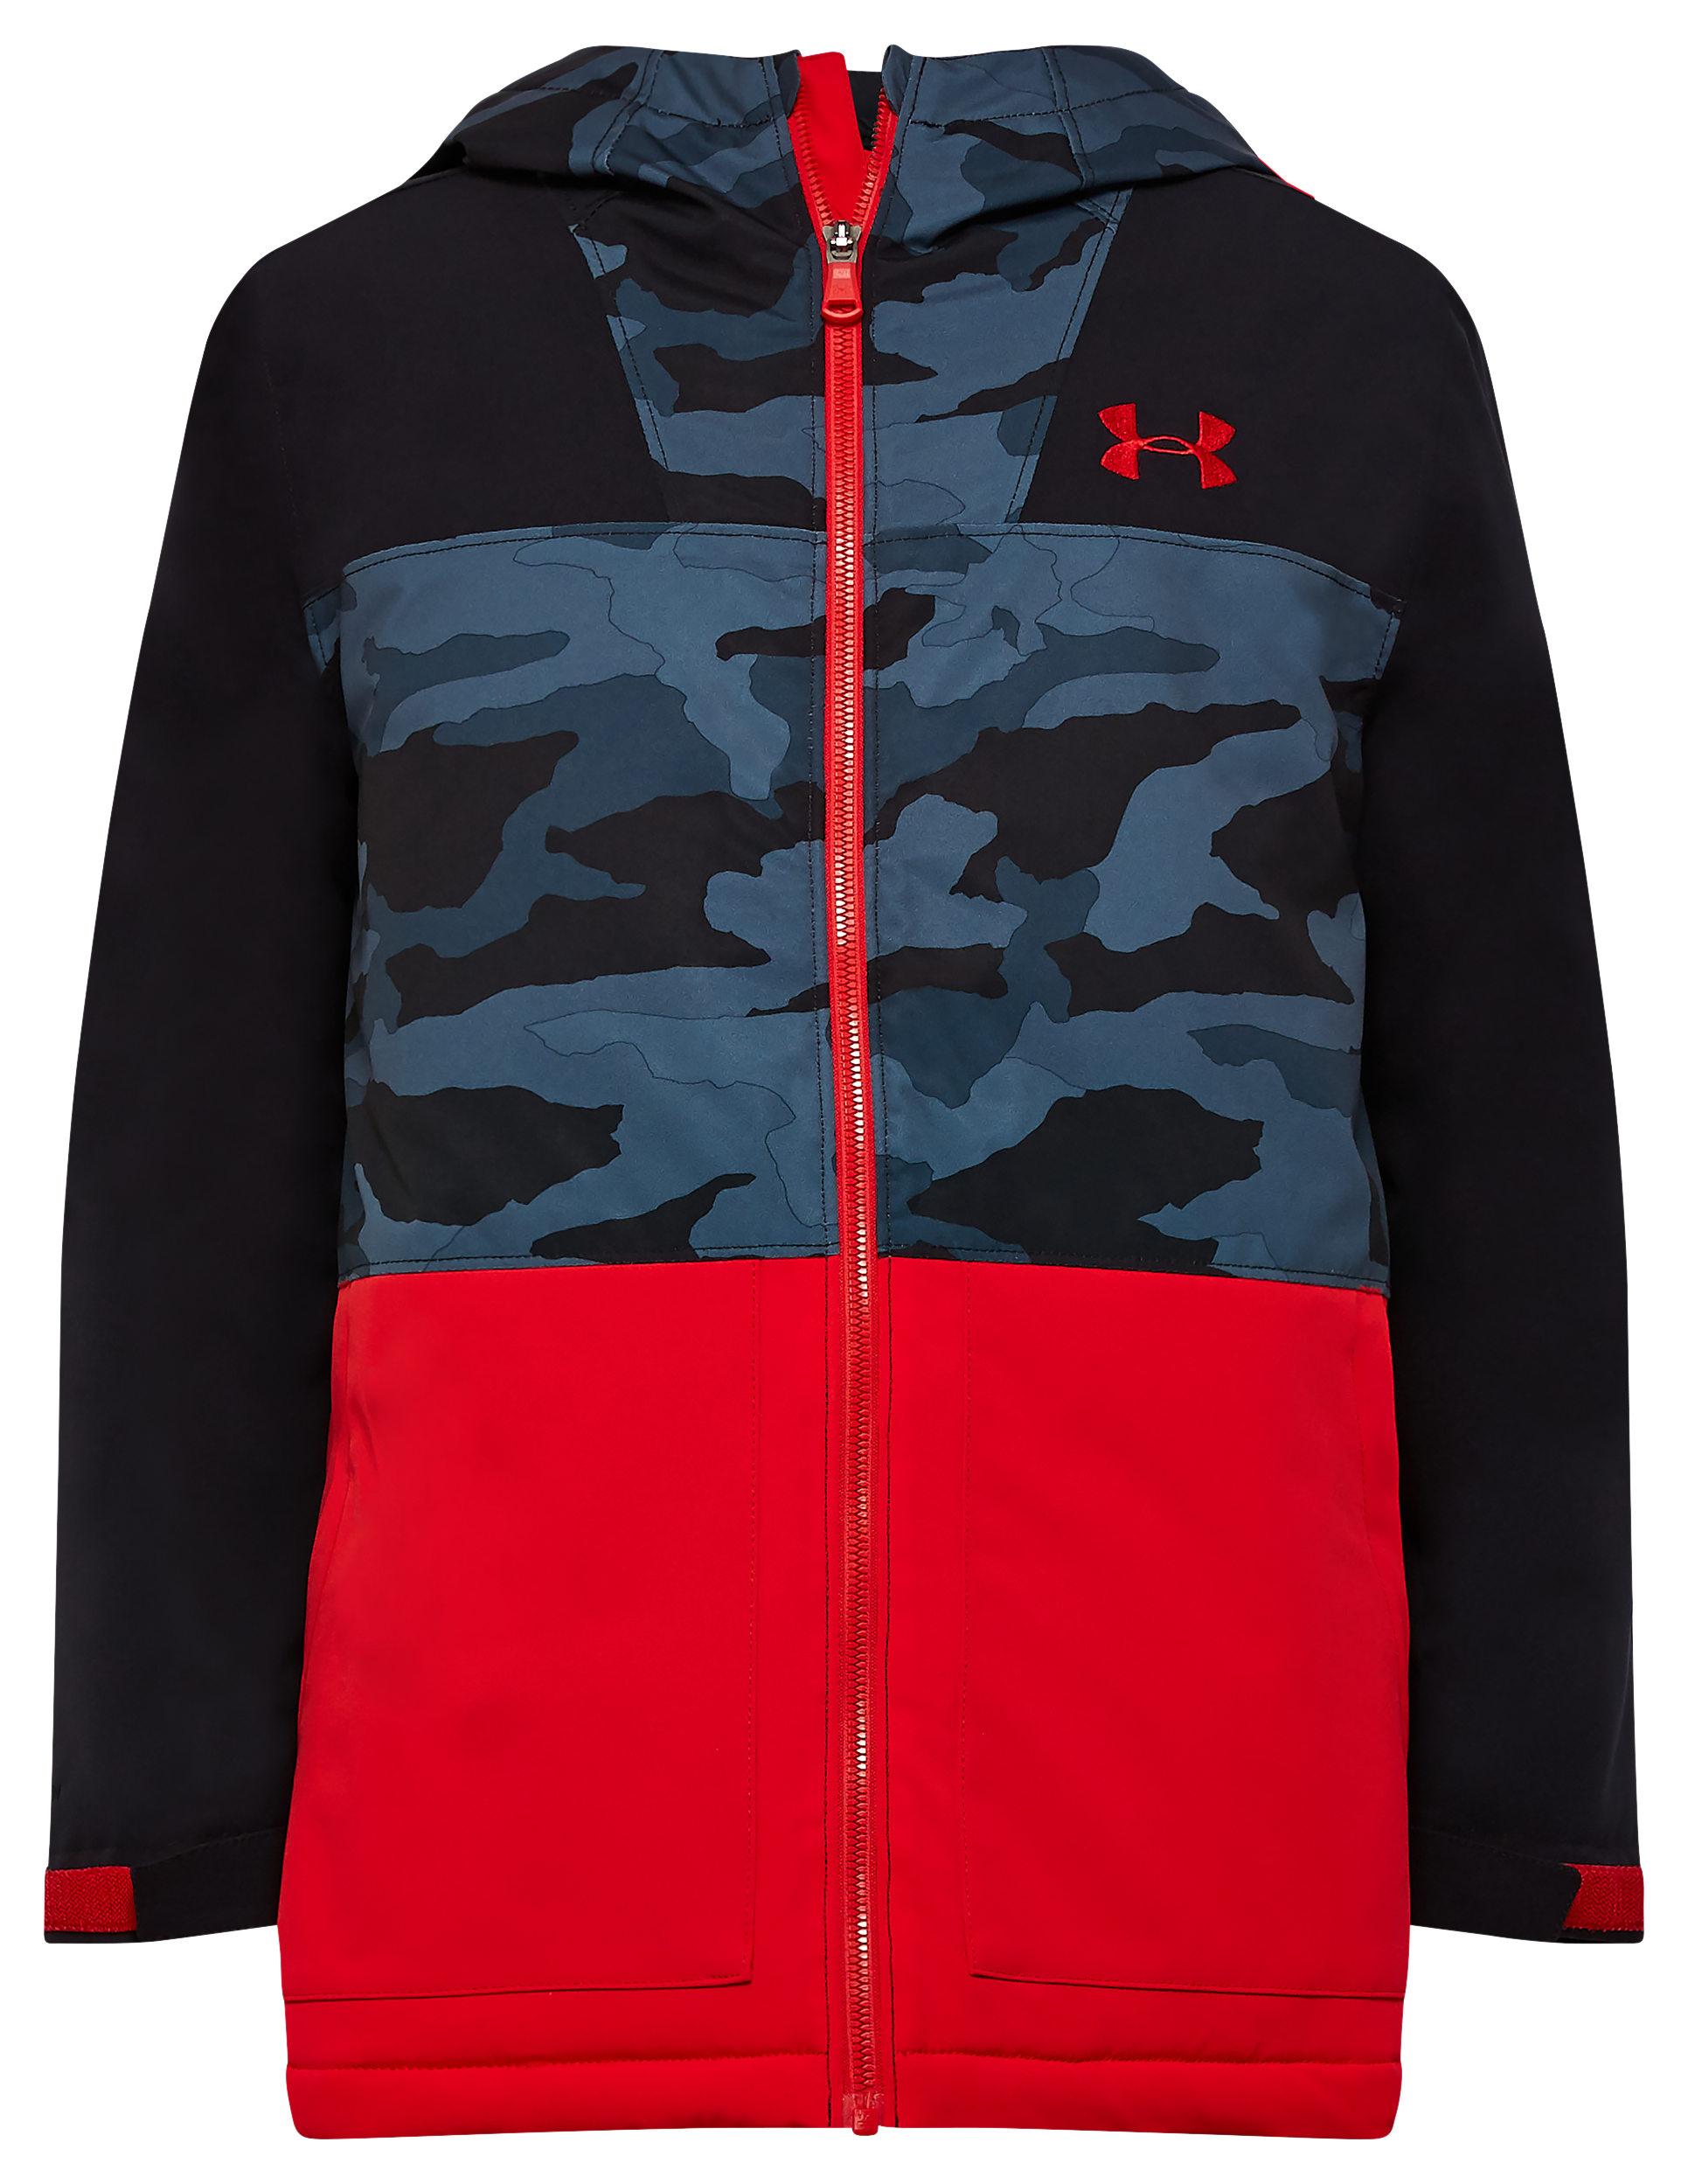 Under Armour Eagleup Jacket for Toddlers - Black/Red - 2T